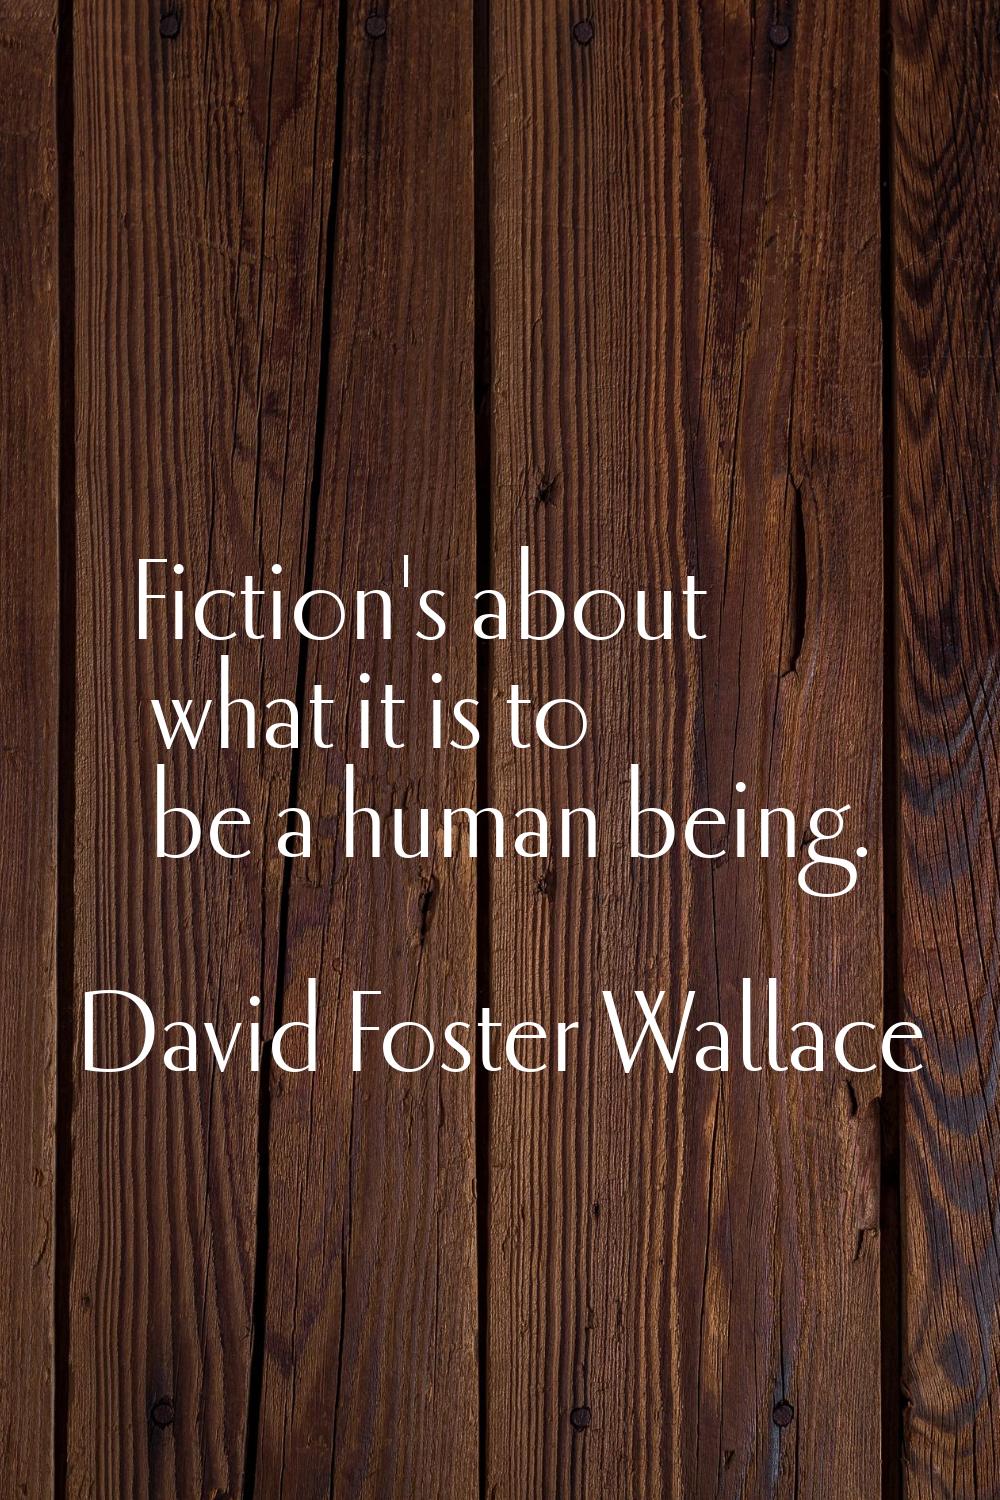 Fiction's about what it is to be a human being.